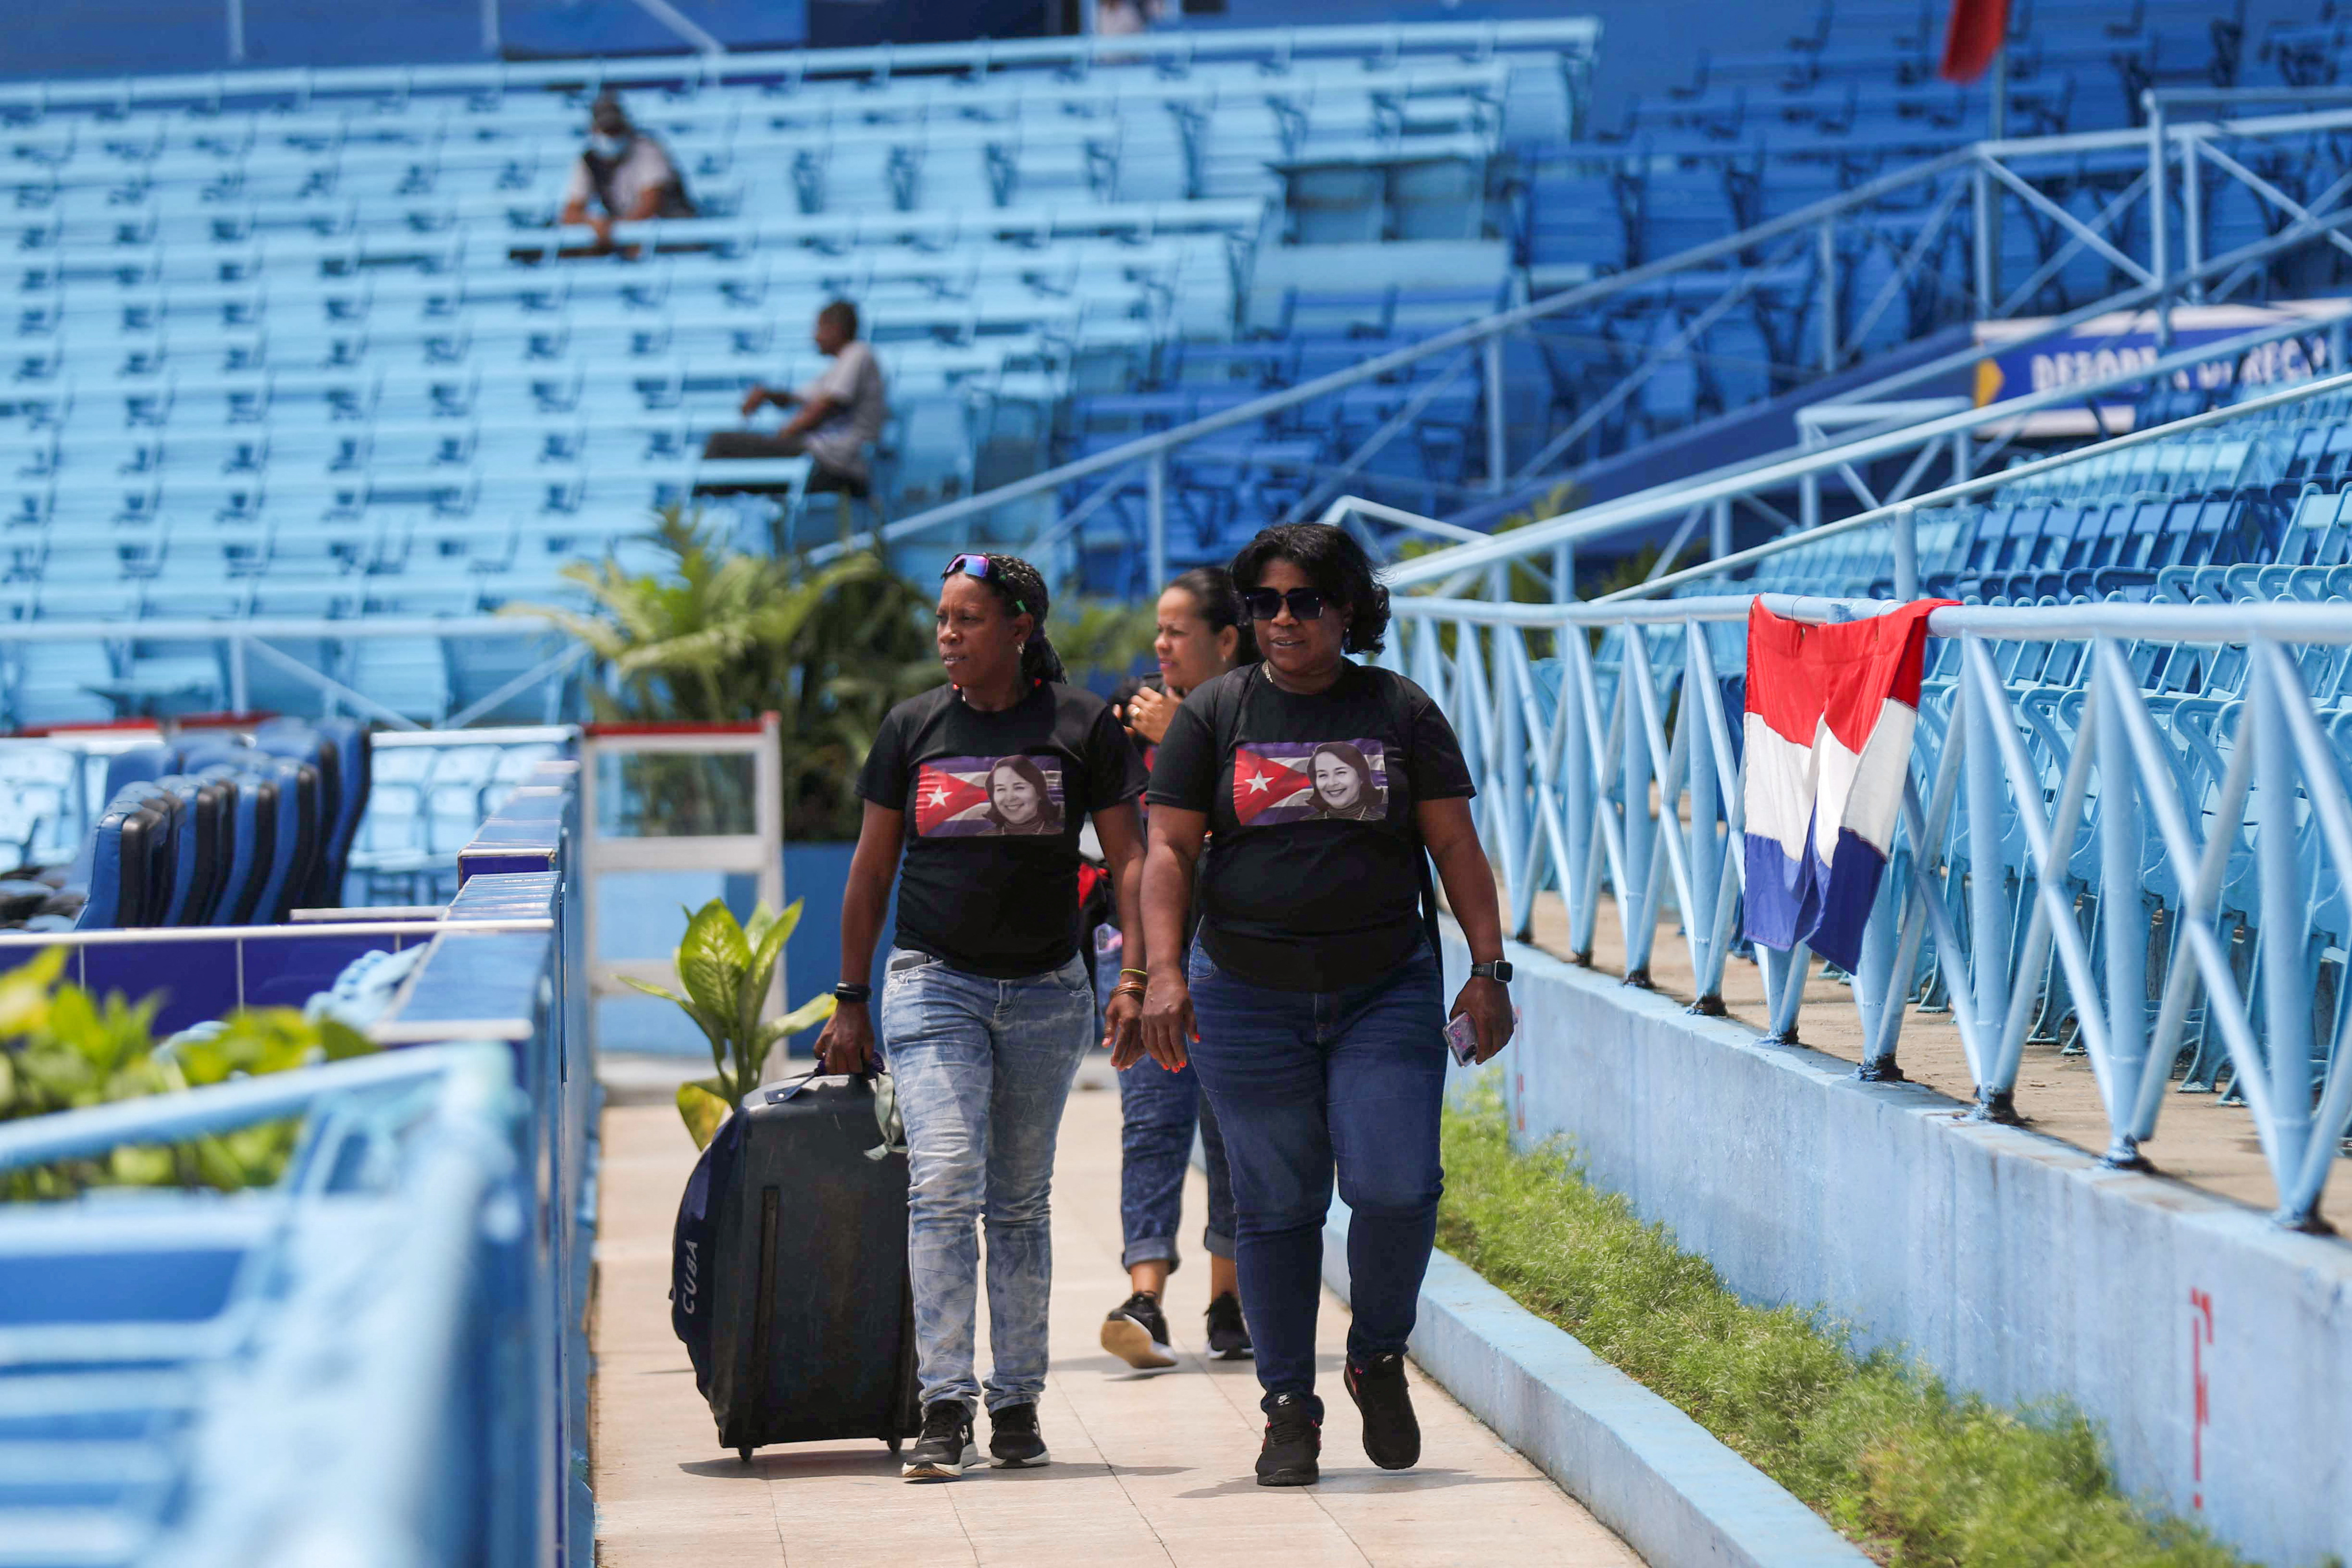 Cuba's first taste of Women's World Cup qualifying coincides with